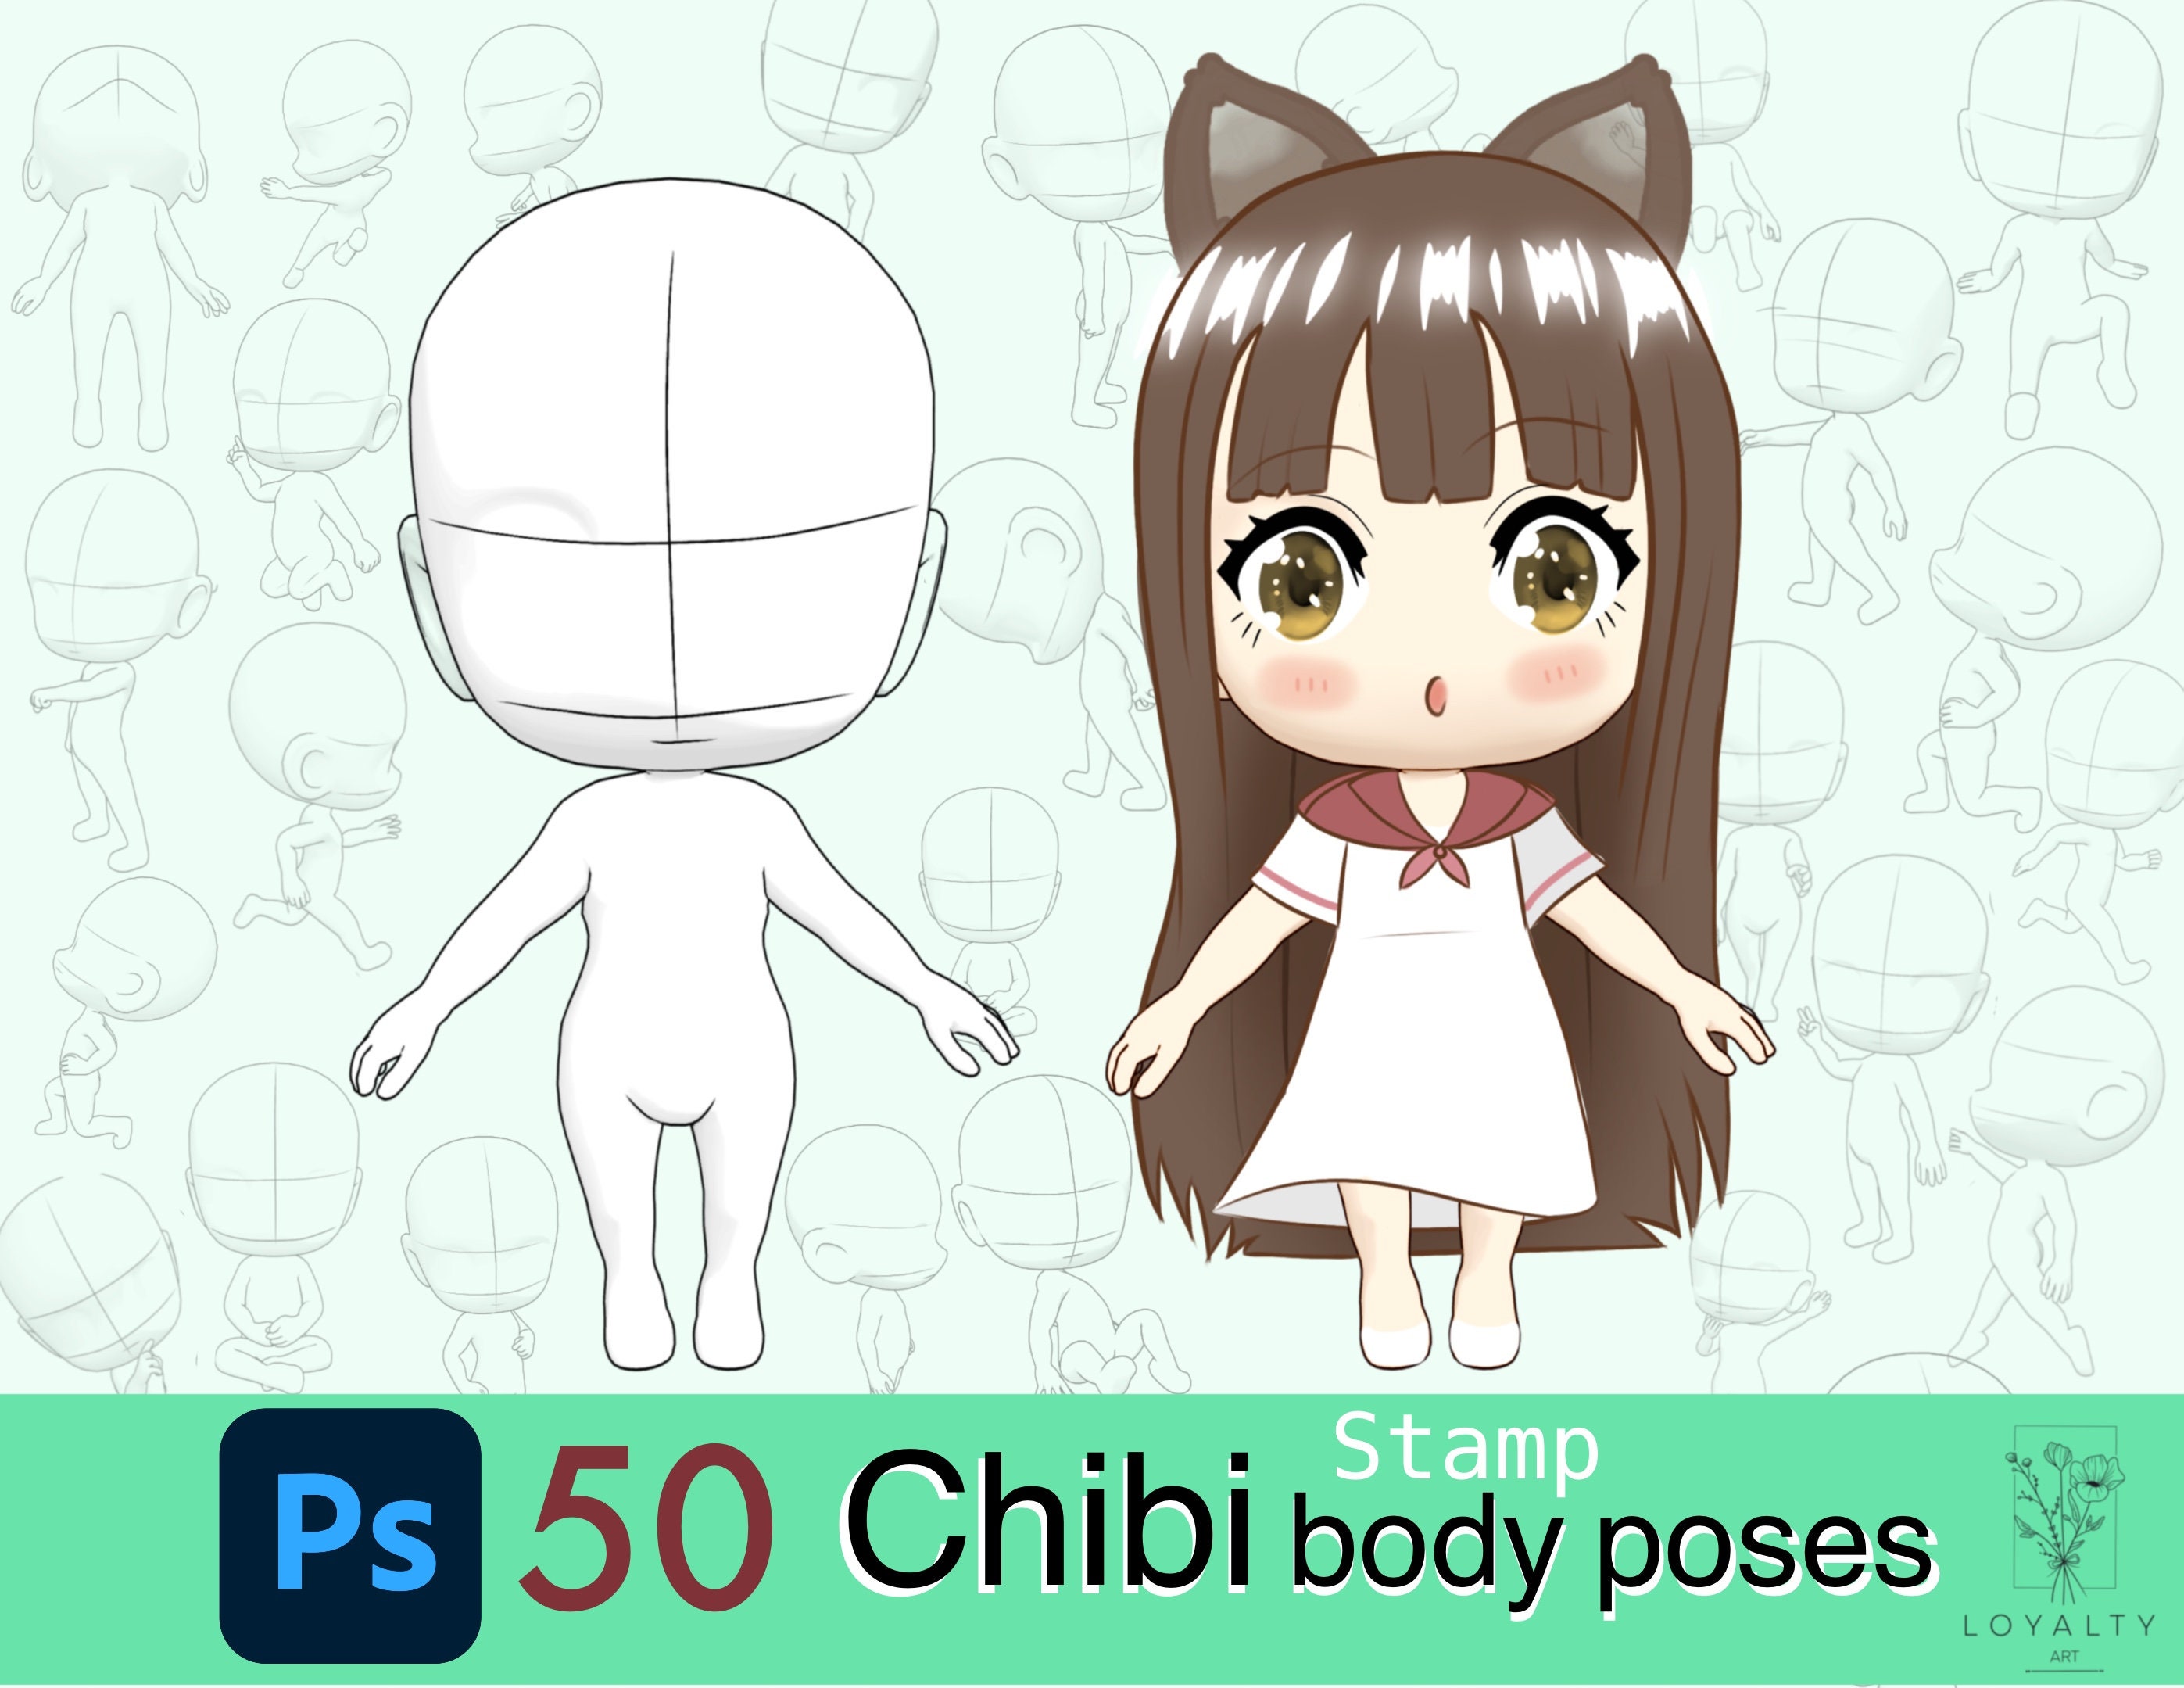 Pin by kirby superstar on animes bases | Drawing base, Anime poses  reference, Chibi sketch